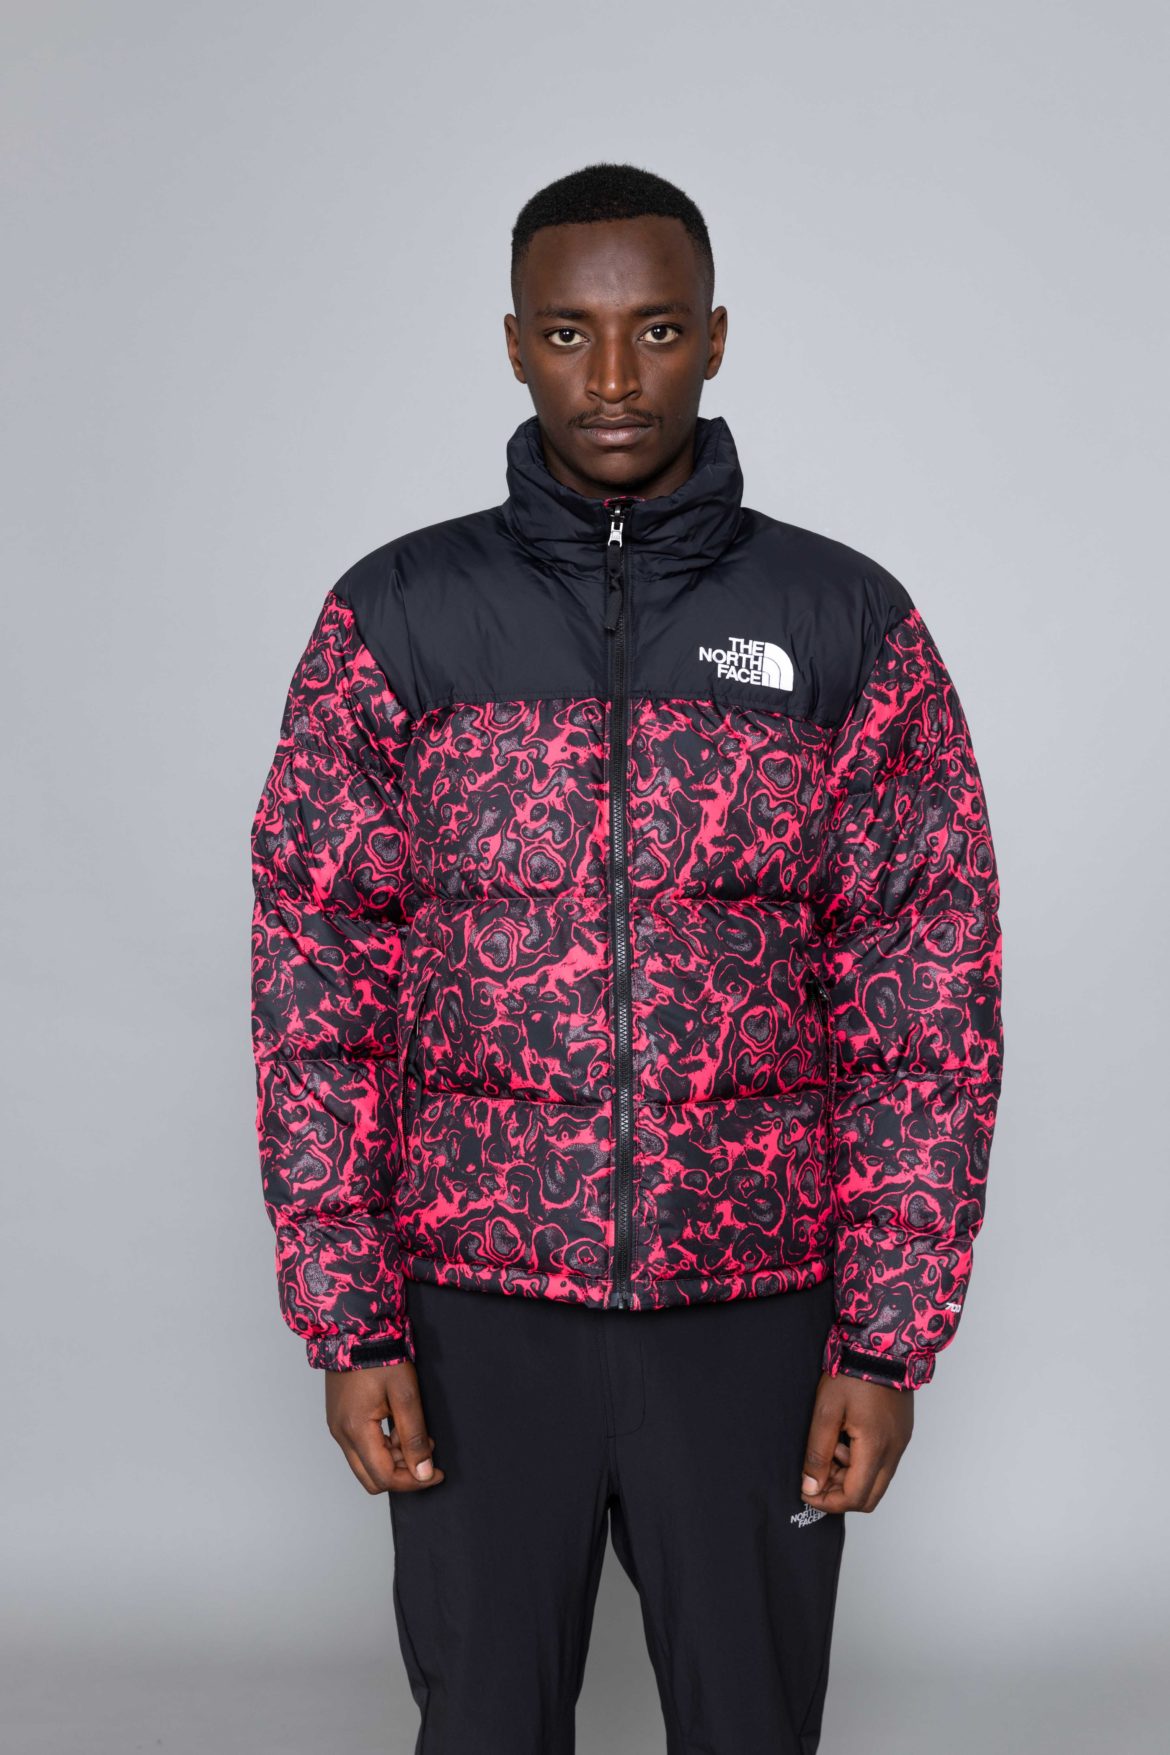 the north face 1996 rose